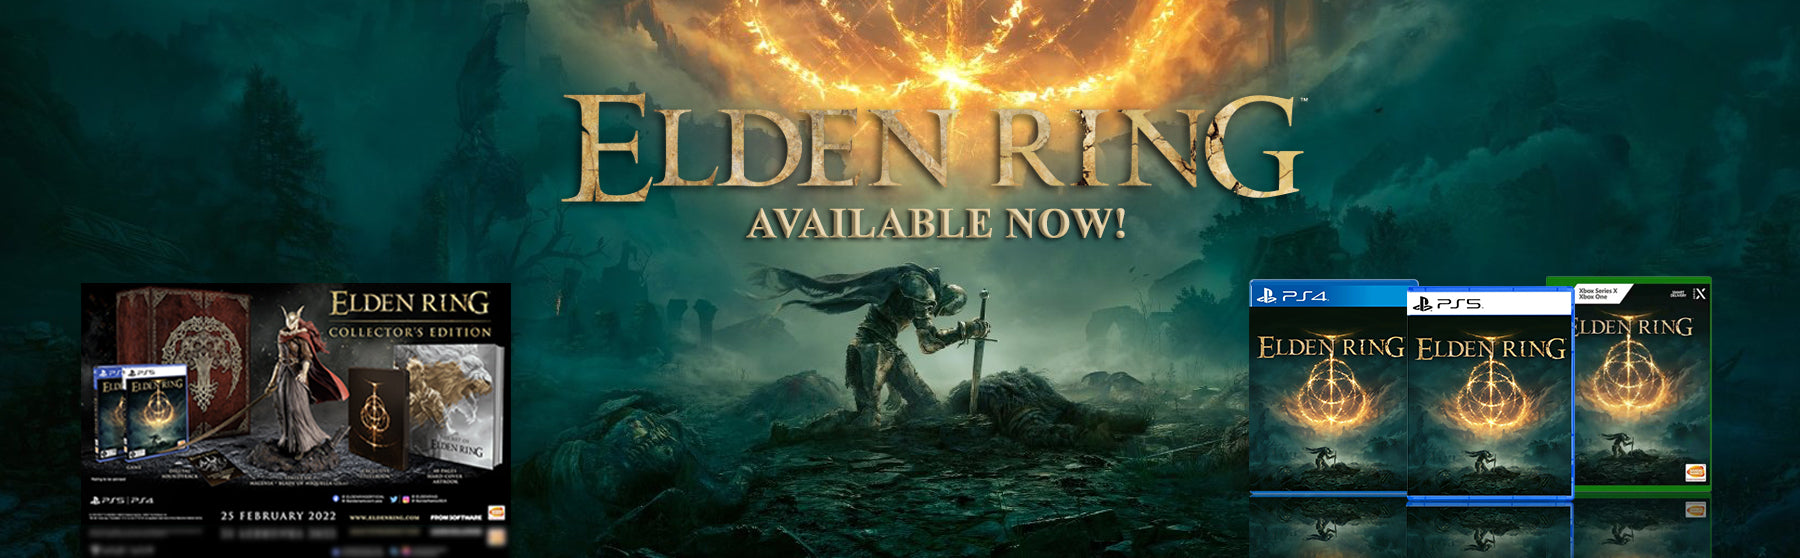 ELDEN RING Physical Full Game [PS4] - LAUNCH EDITION EU